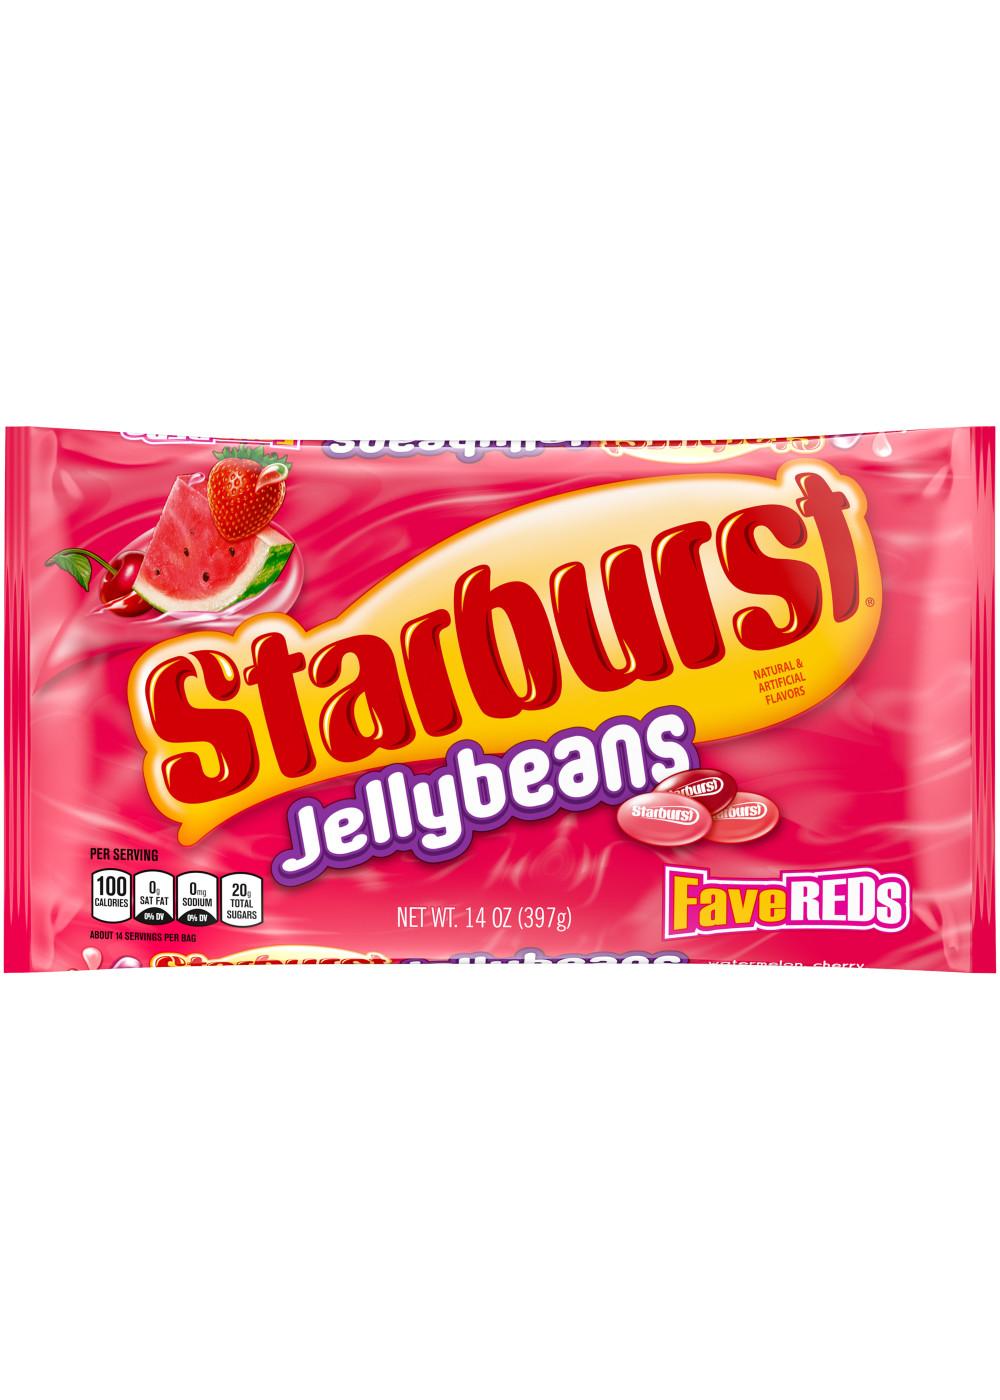 Starburst FaveREDs Jelly Beans Easter Candy; image 1 of 2